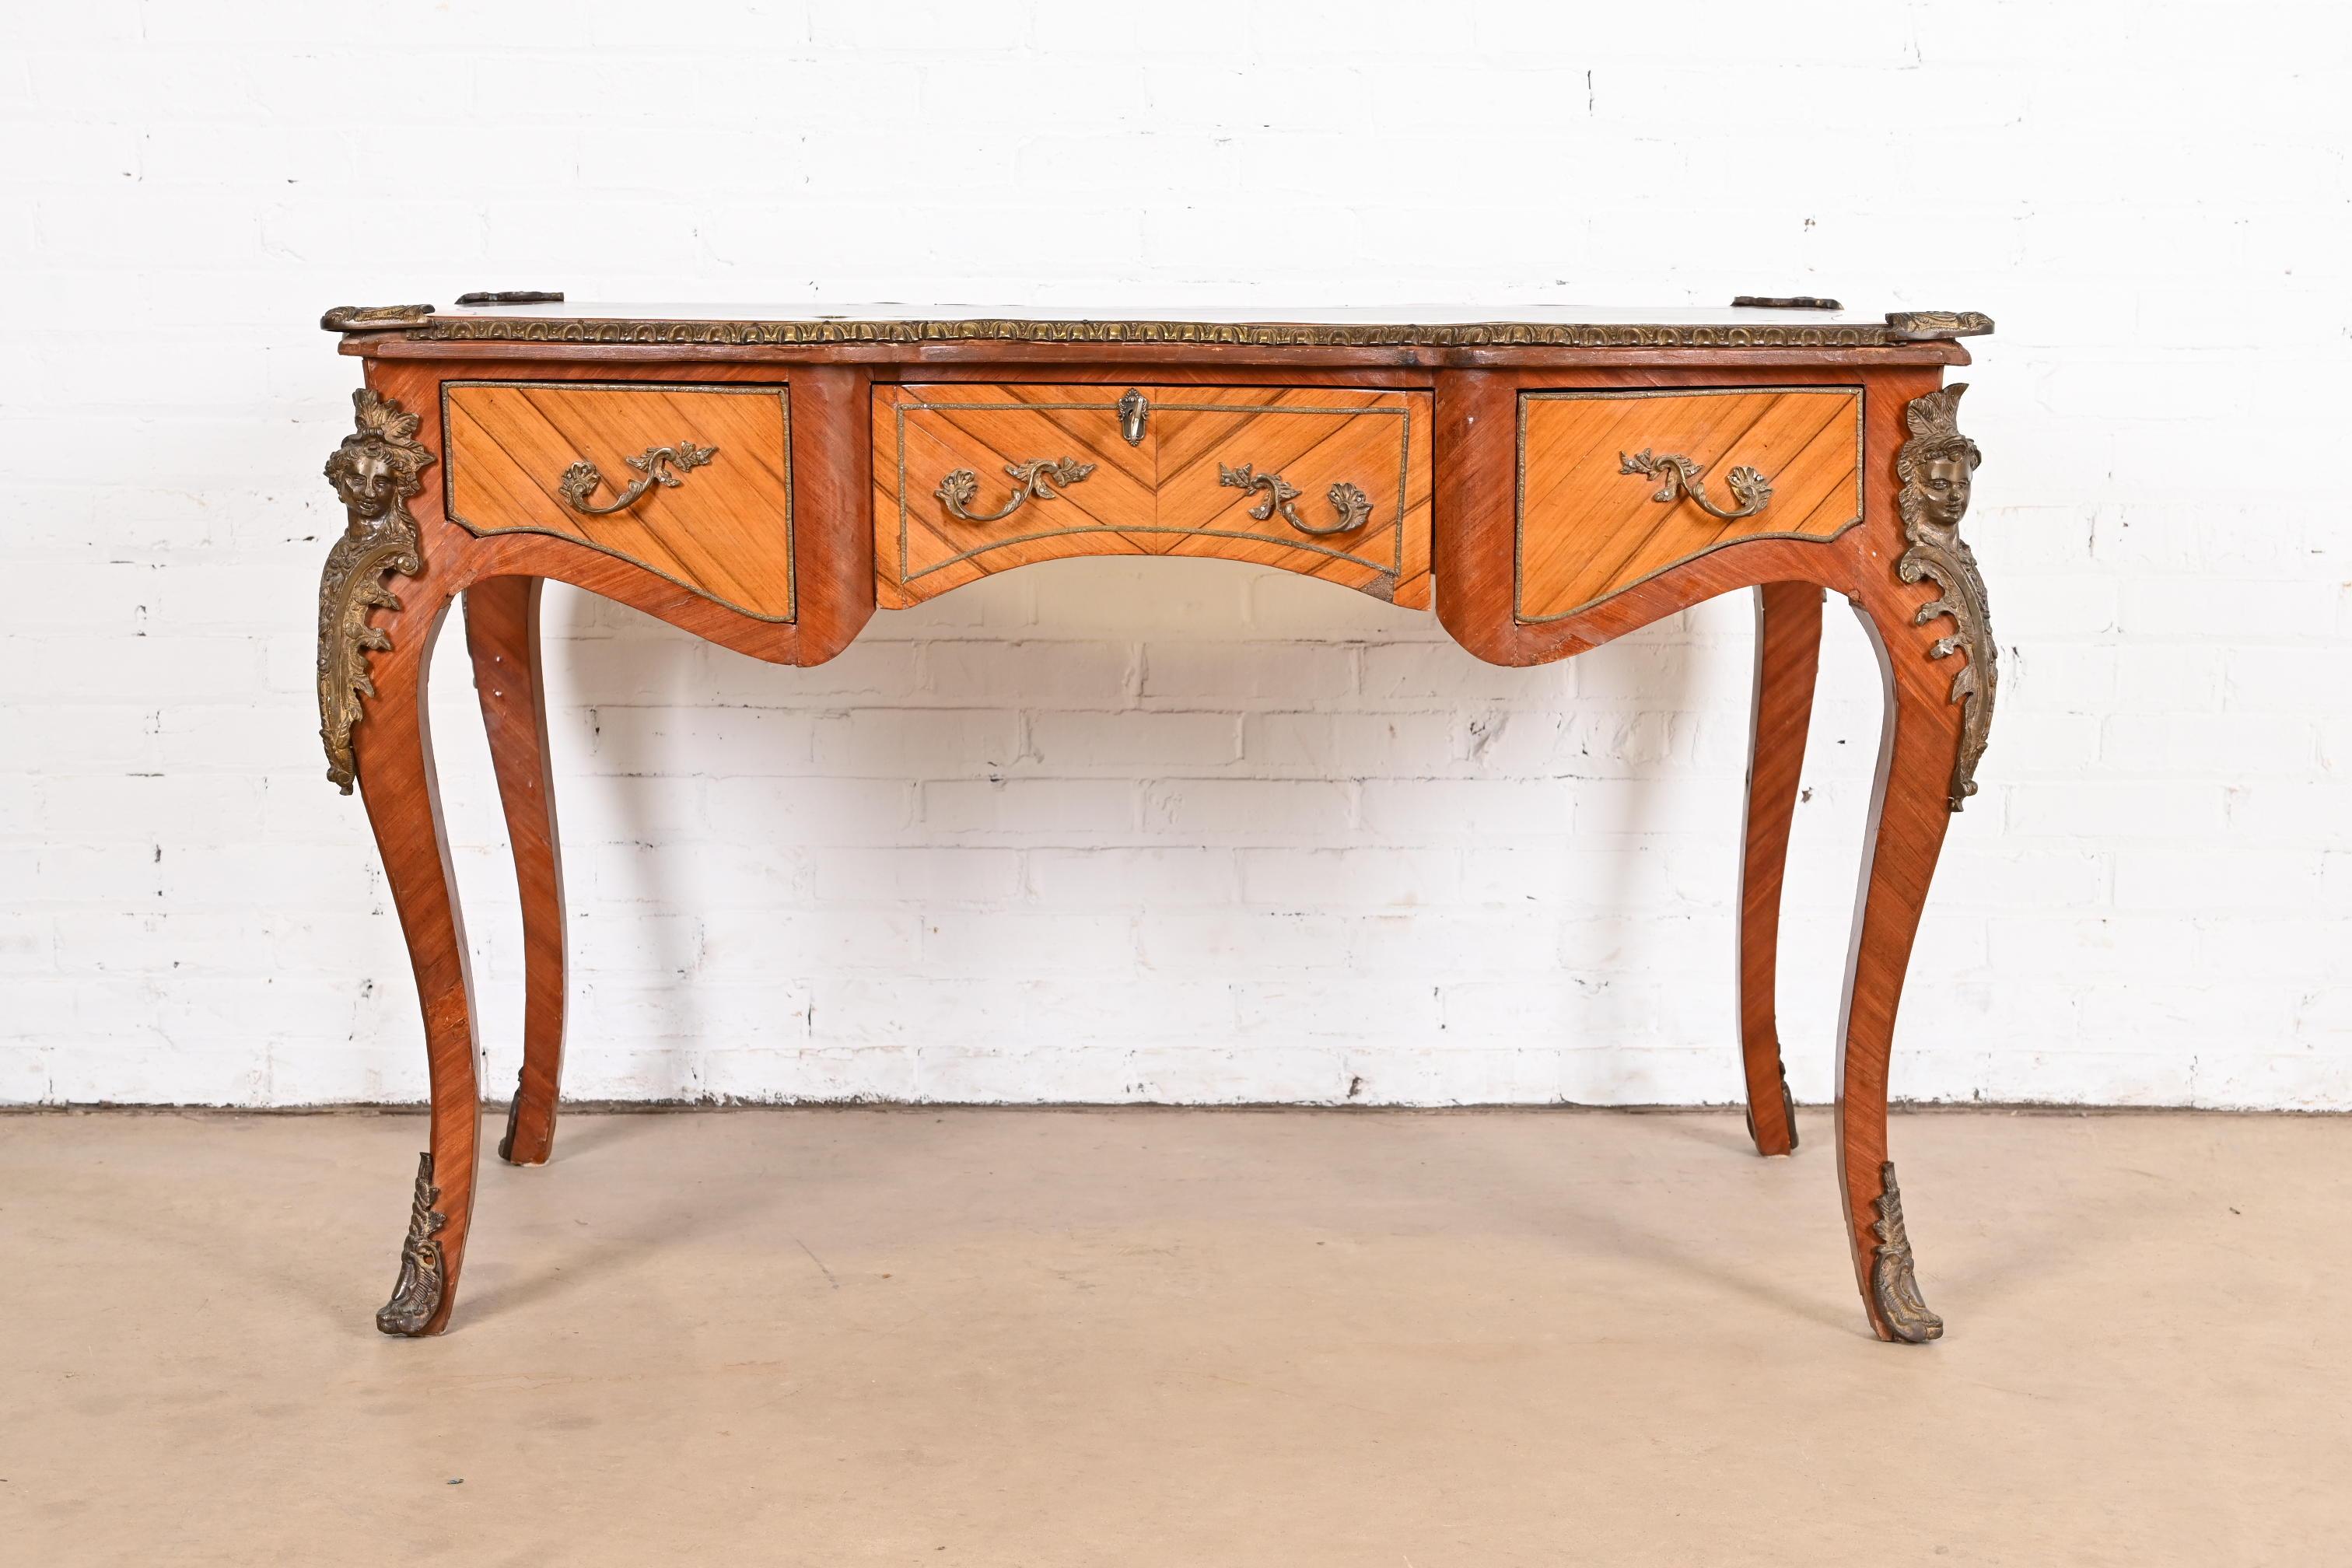 French Louis XV Kingwood Bureau Plat Leather Top Desk With Mounted Bronze Ormolu In Good Condition For Sale In South Bend, IN